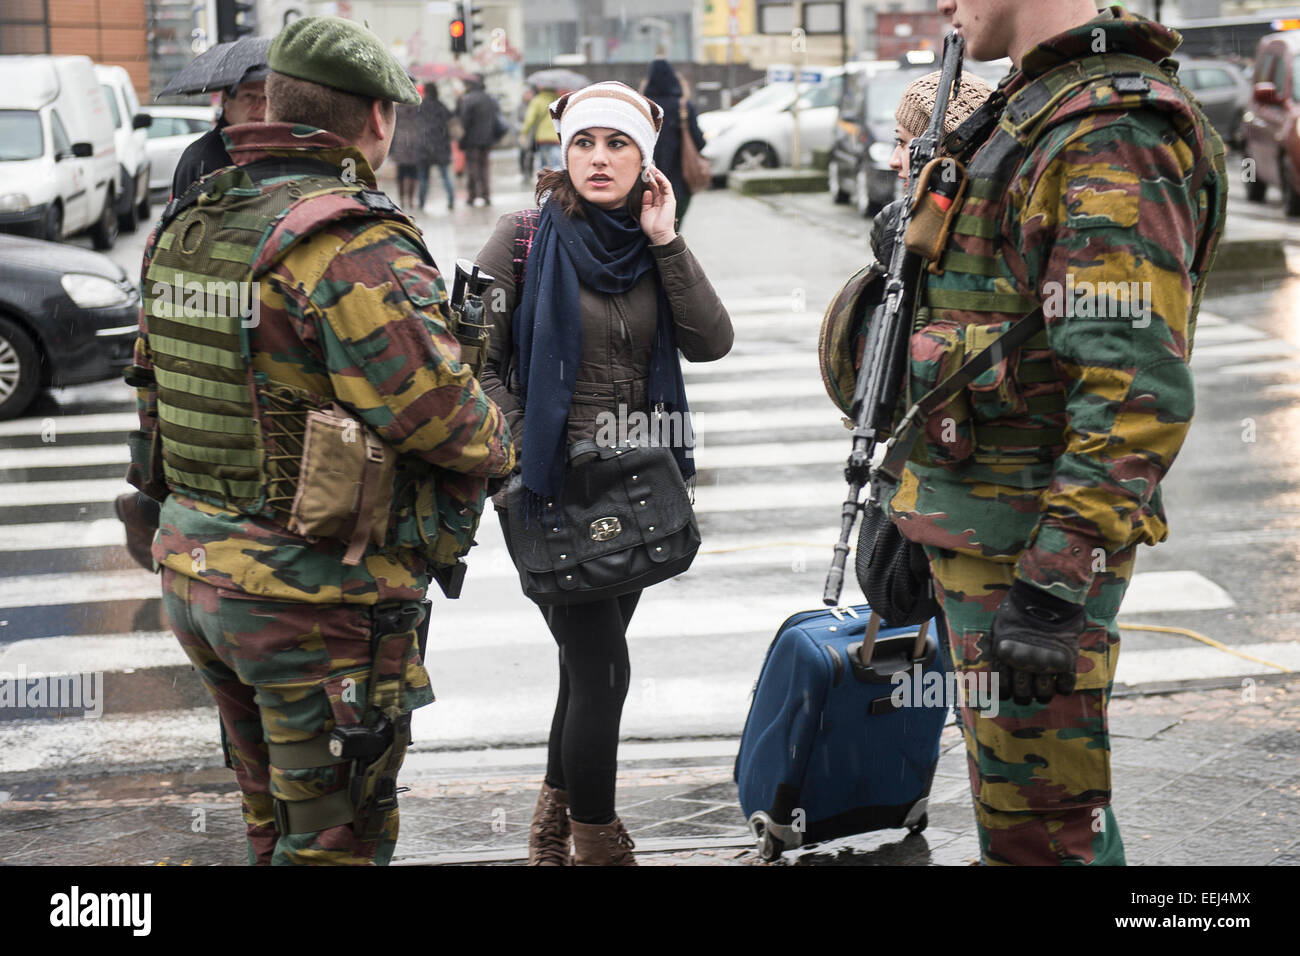 Brussels, Belgium. 19th Jan, 2015. Belgian soldiers stand on guard outside European Union headquarters in Brussels, Belgium on 19.01.2015 Belgian troops were deployed at sensitive sites in Brussels and Antwerp to upgrade security presence after a series of raids on suspected Islamic jihadists in various locations across Belgium with 13 arrests on Thursday evening and two people killed as part of a raid on a premise in the eastern town of Verviers. Another 150 troops will be deployed next week, as local media reports. Credit:  dpa picture alliance/Alamy Live News Stock Photo